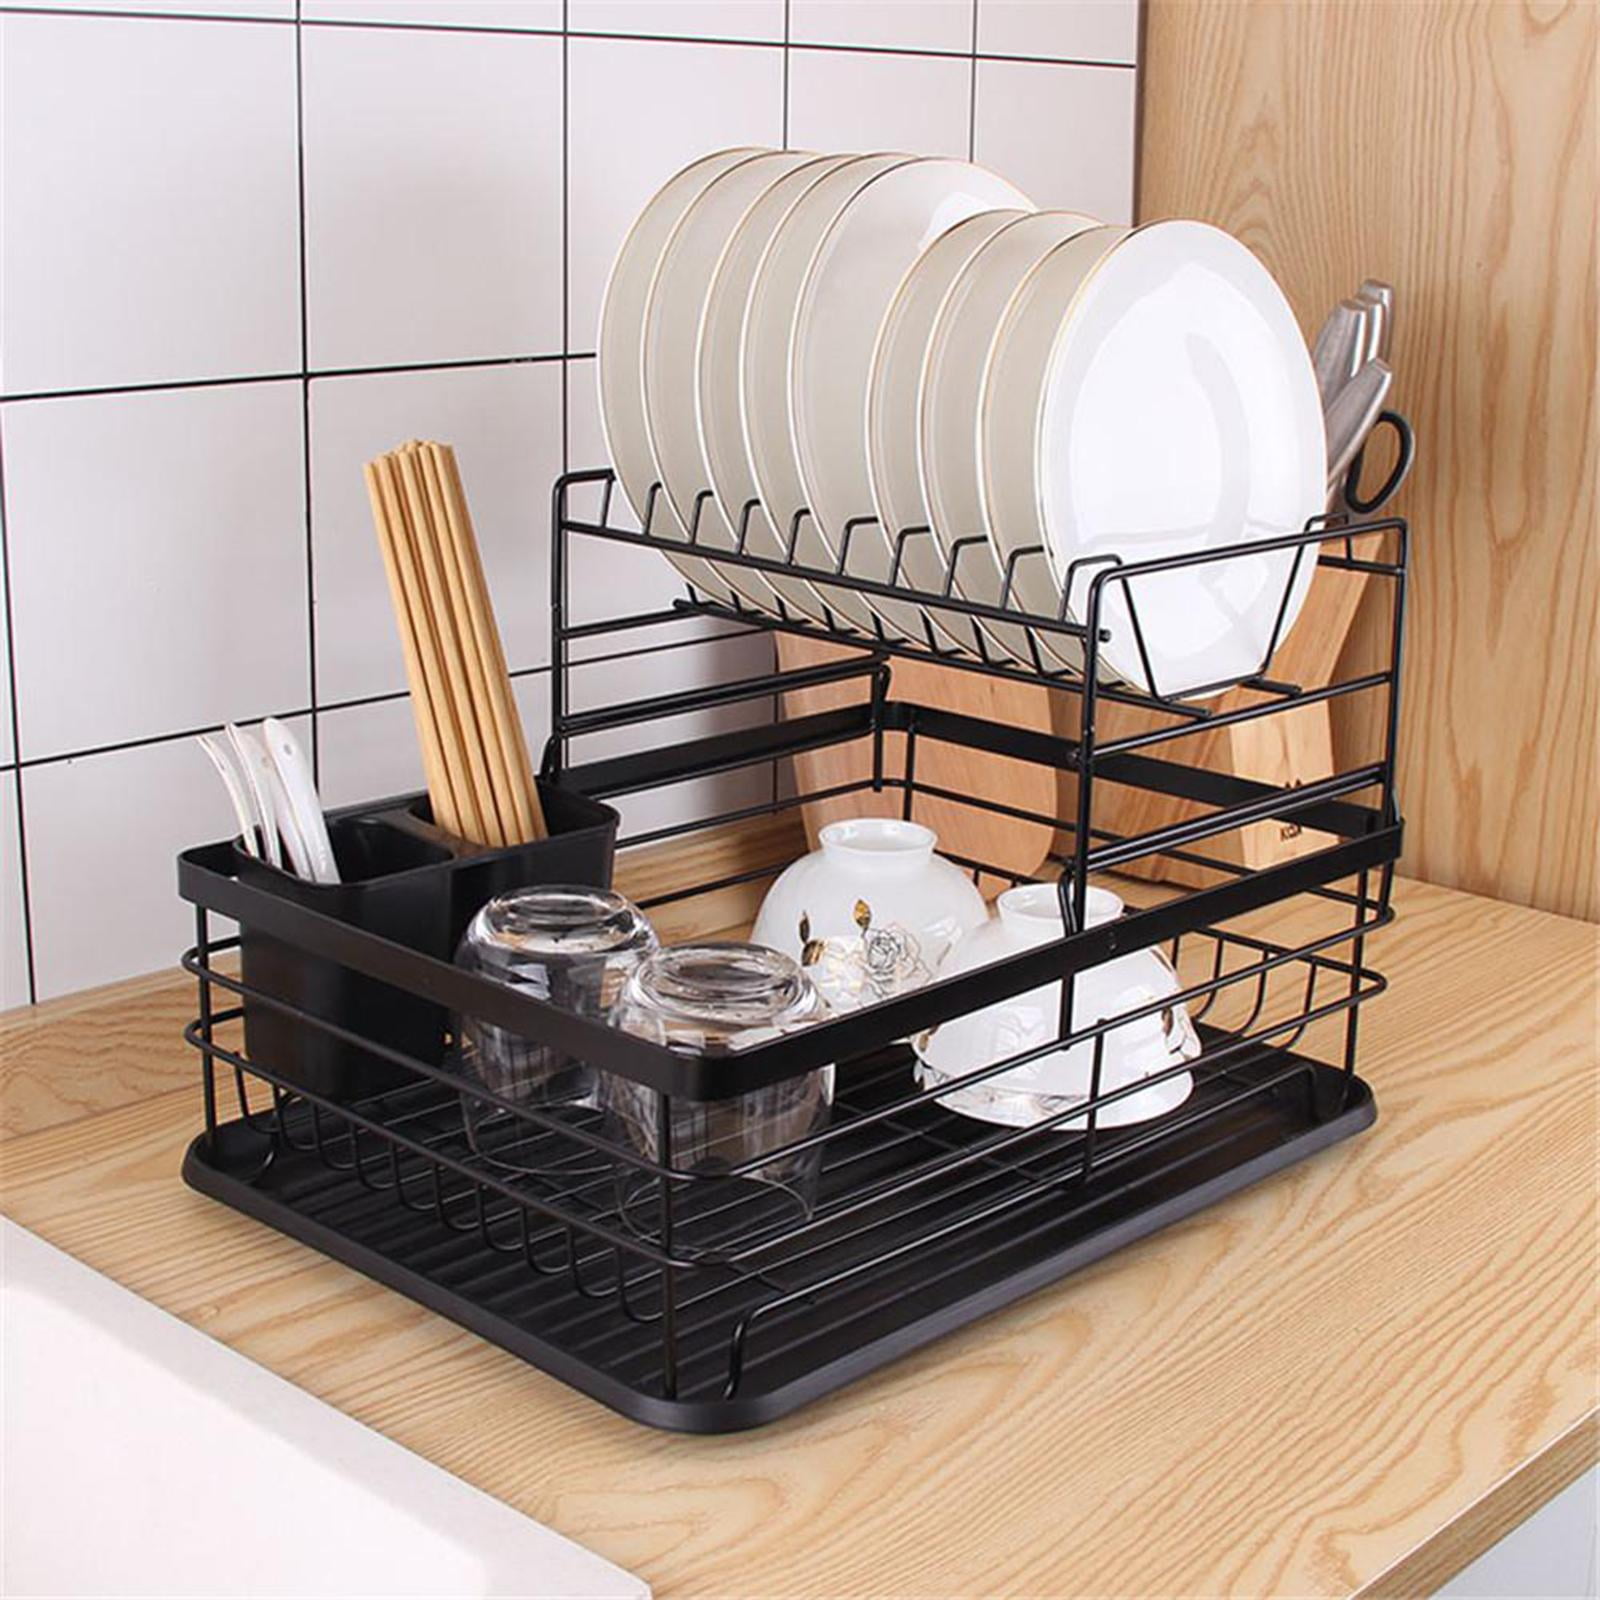 BOBELA Dish Drying Rack,Dish Racks for Kitchen Counter,Dish Drainers with Removable Utensil Holder,Dish Drying Rack with Drainboard and Extra Dish